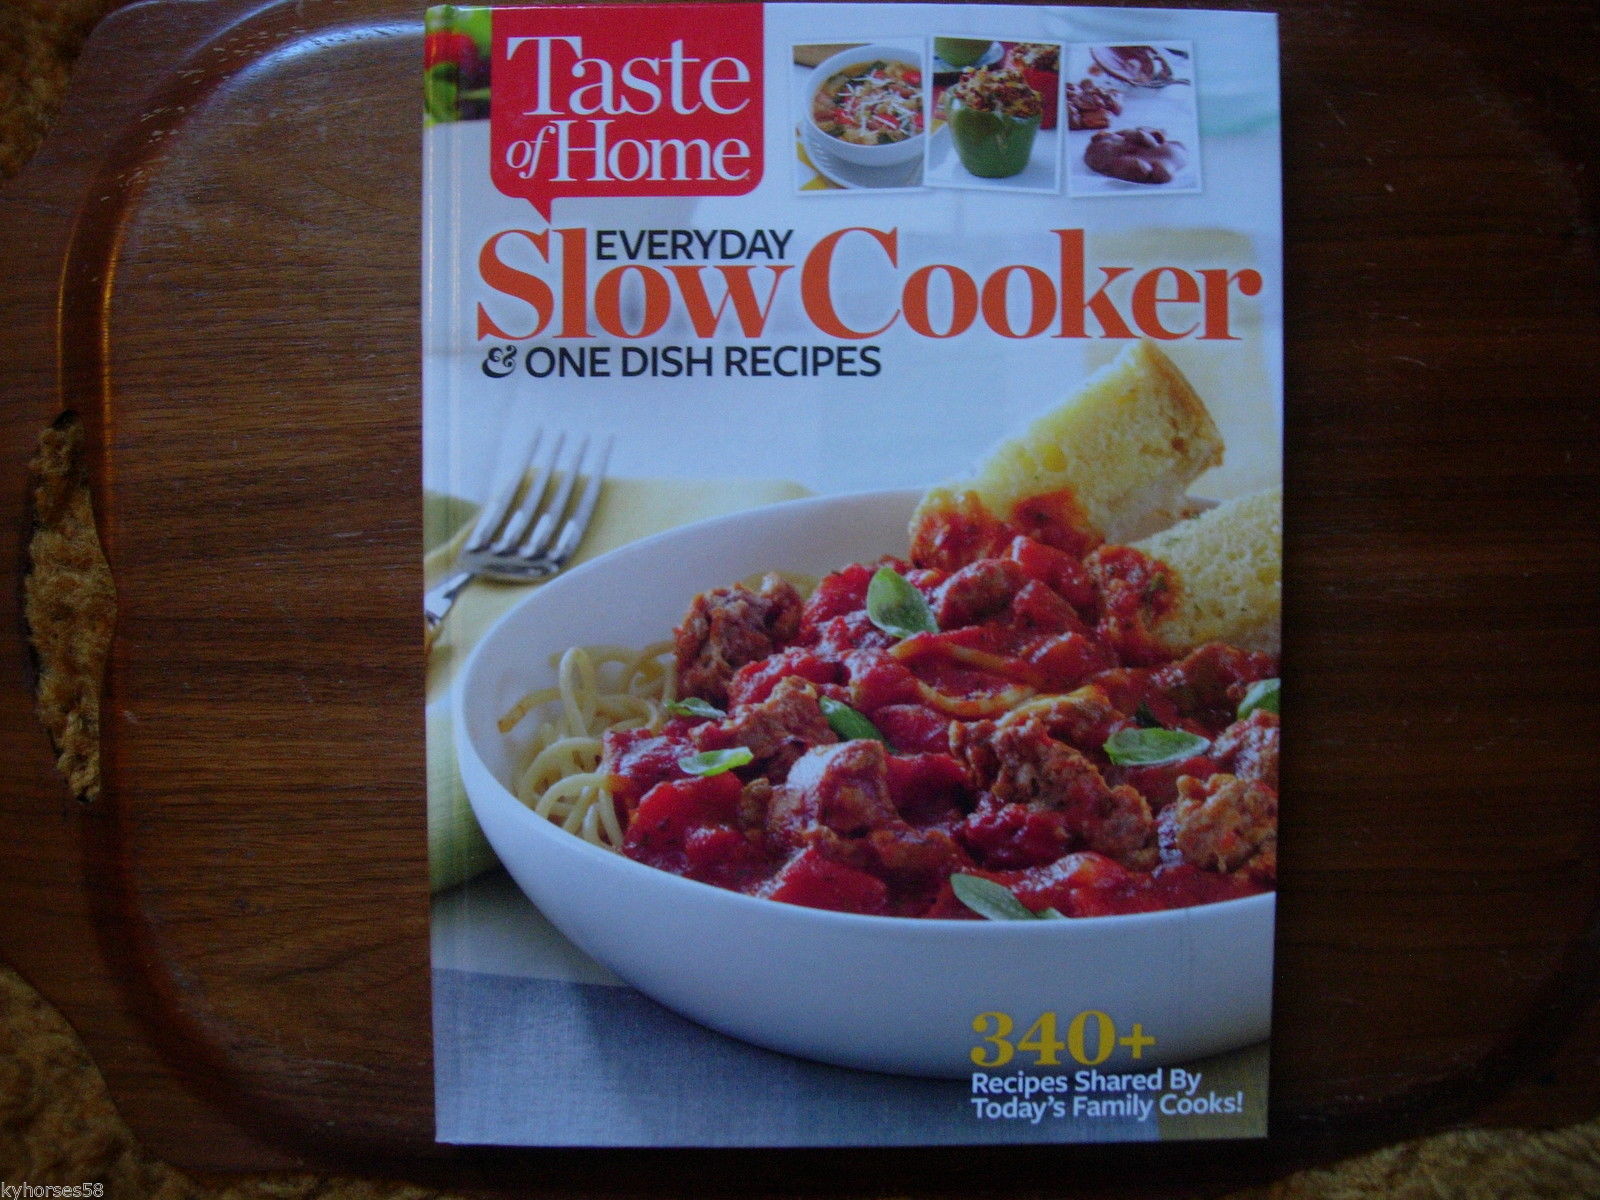 Everyday slow cooker & one dish recipes : Tast of Home Everyday slow cooker and one dish recipes